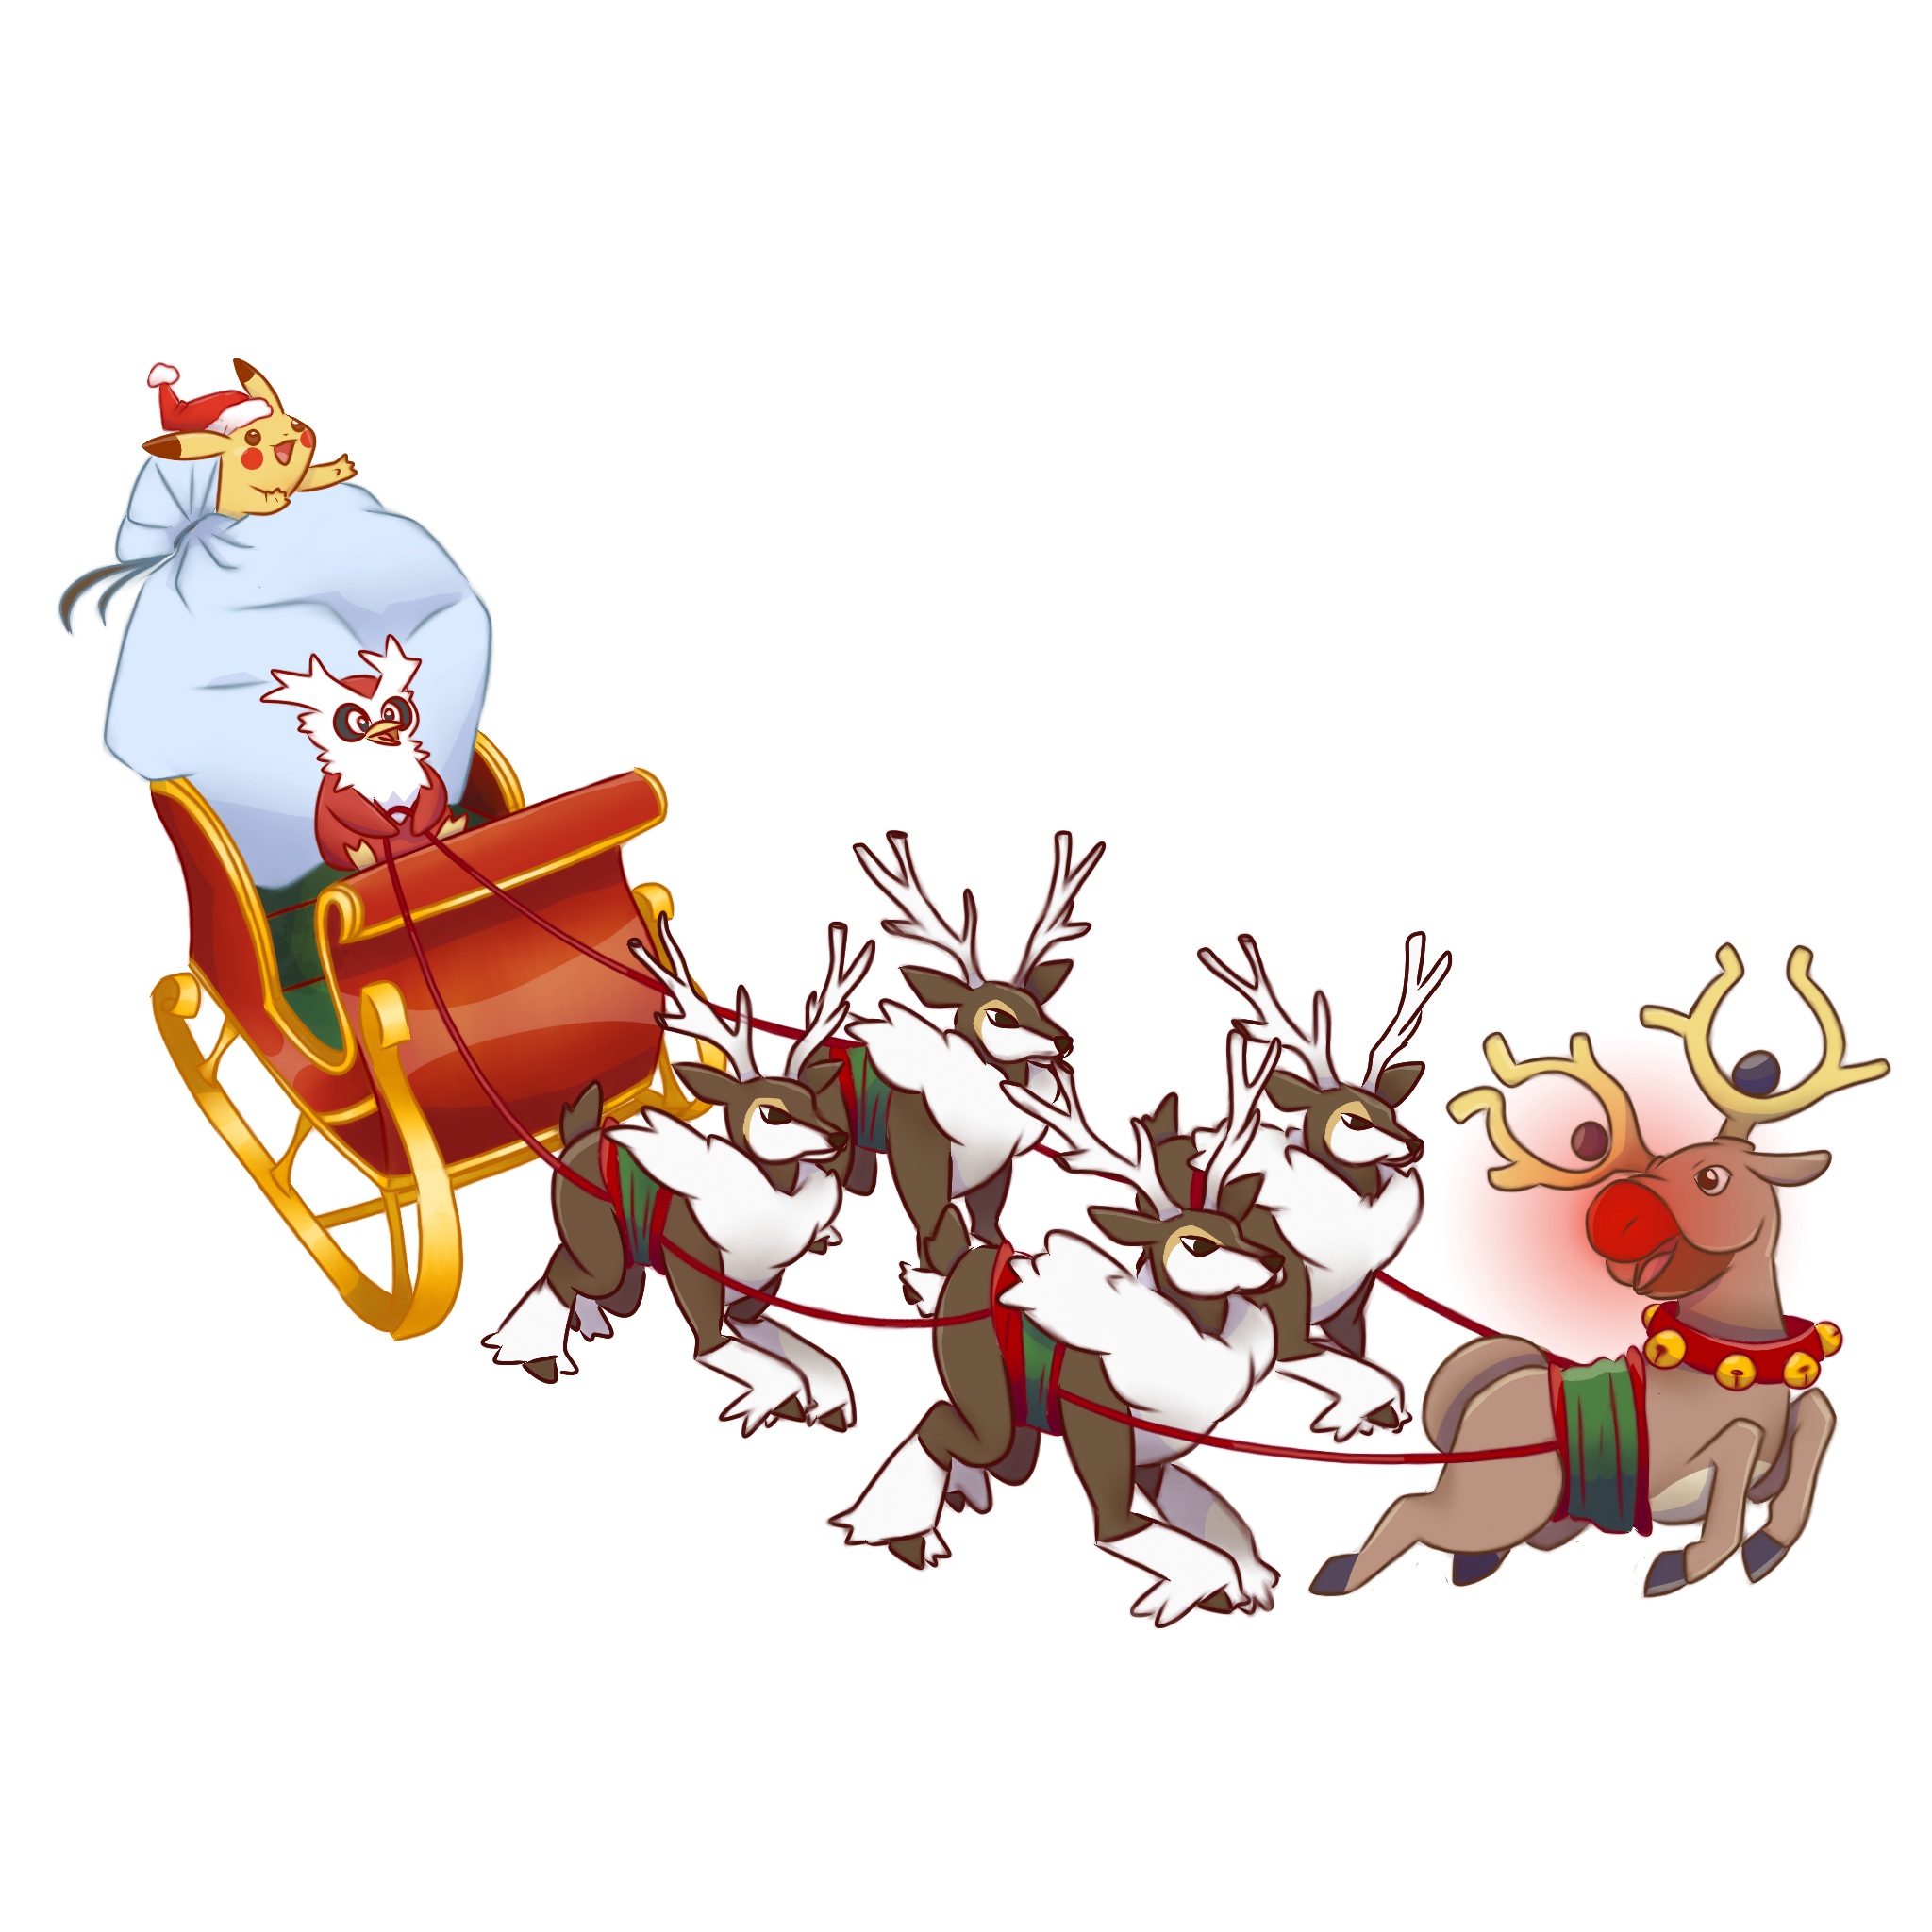 Delibird delivering presents on their sleigh